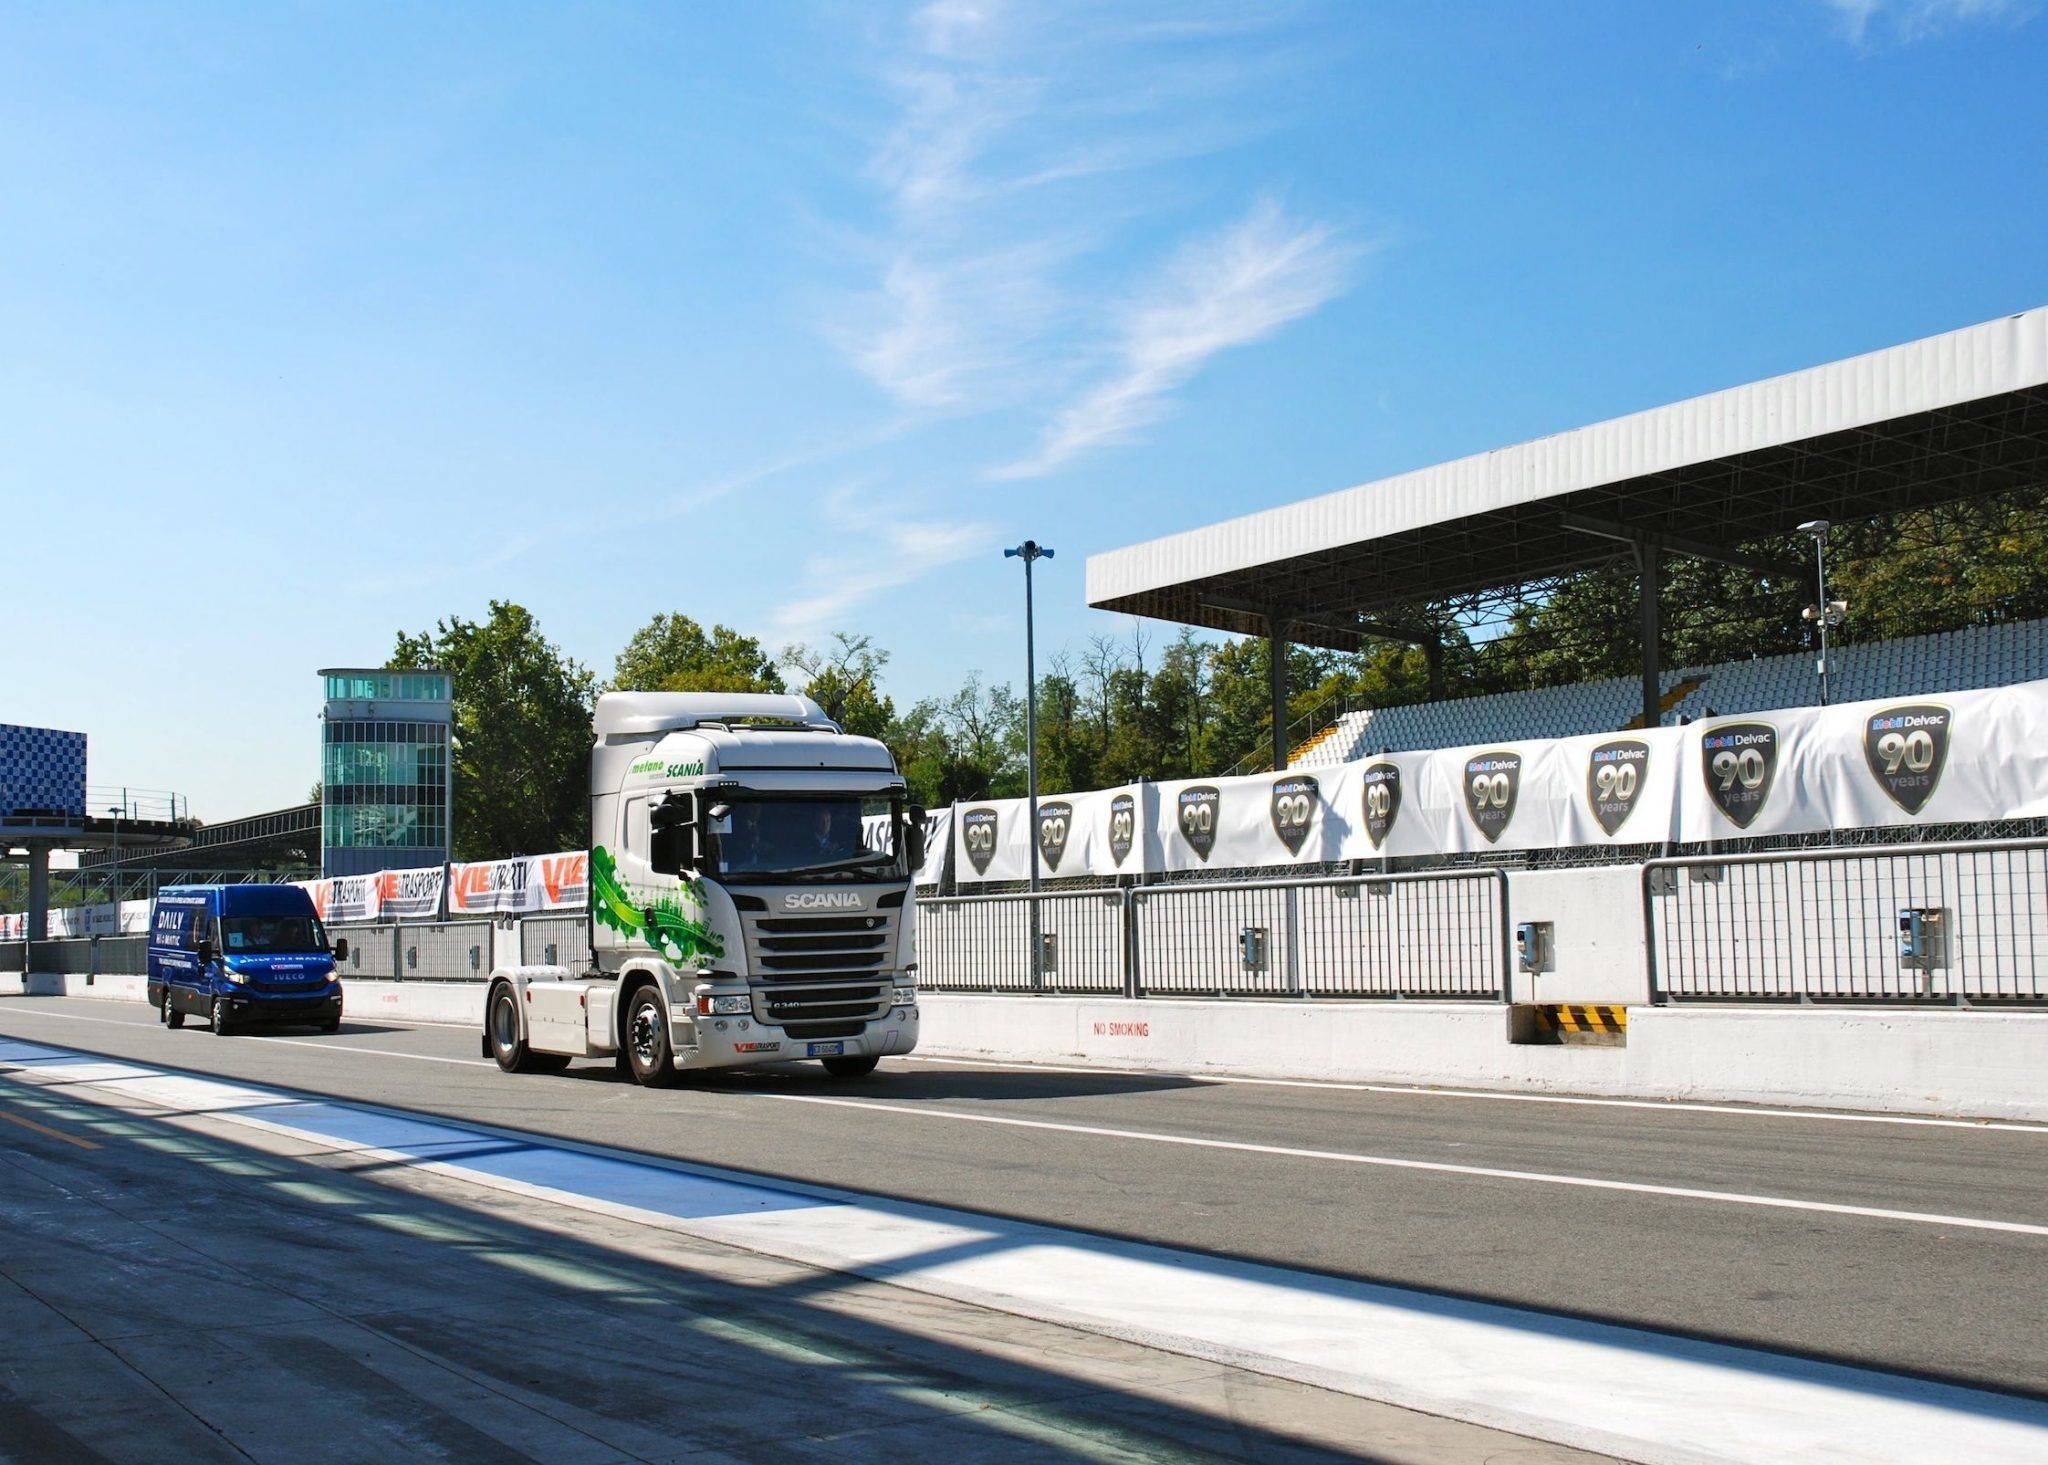 The Scania on Monza's circuit